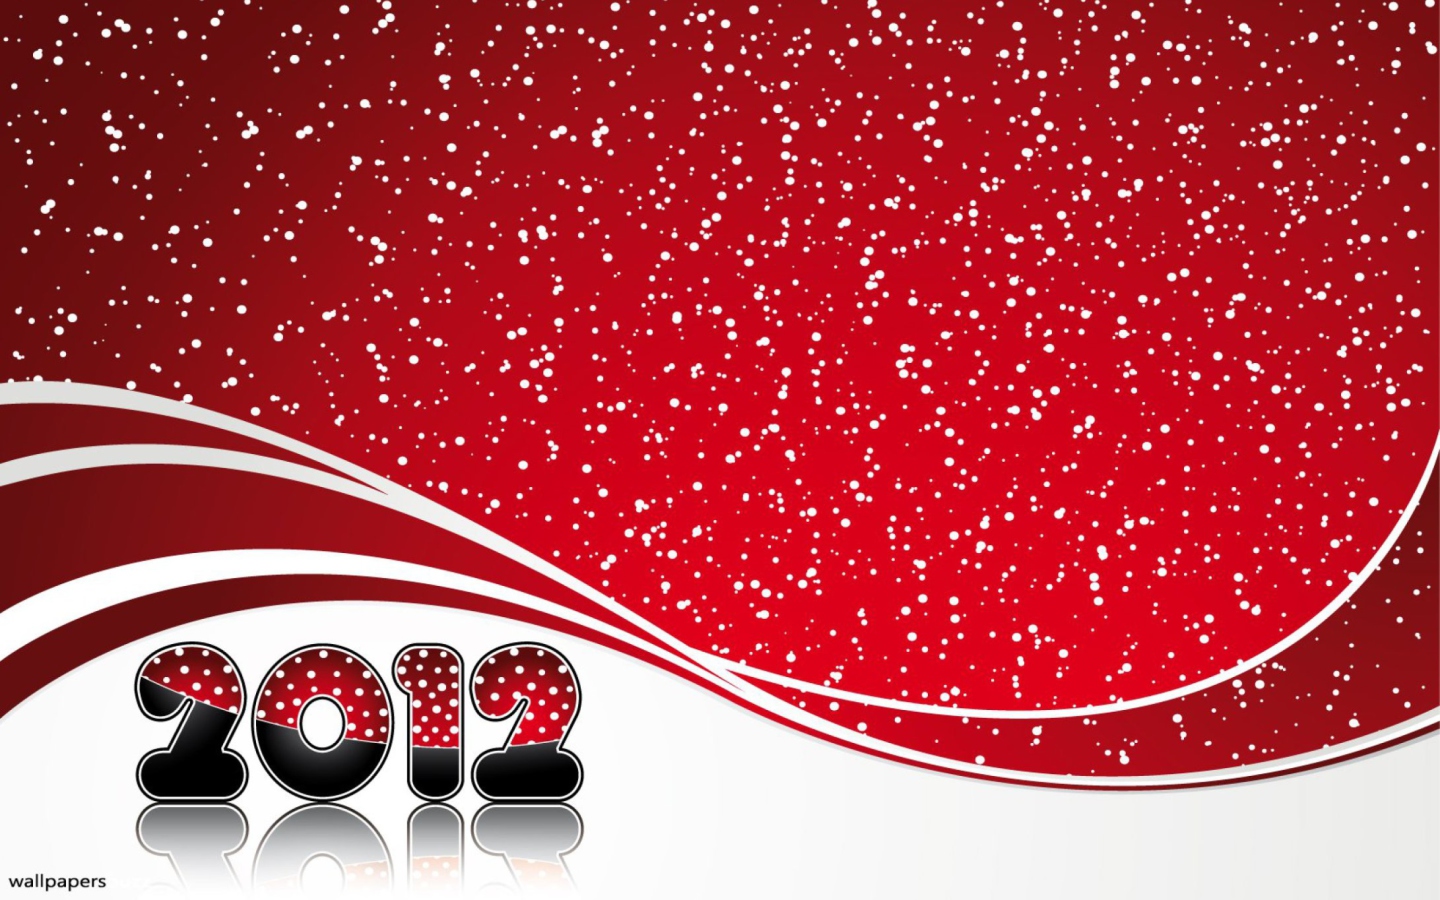 Das Red Snow New Year Wallpaper 1440x900